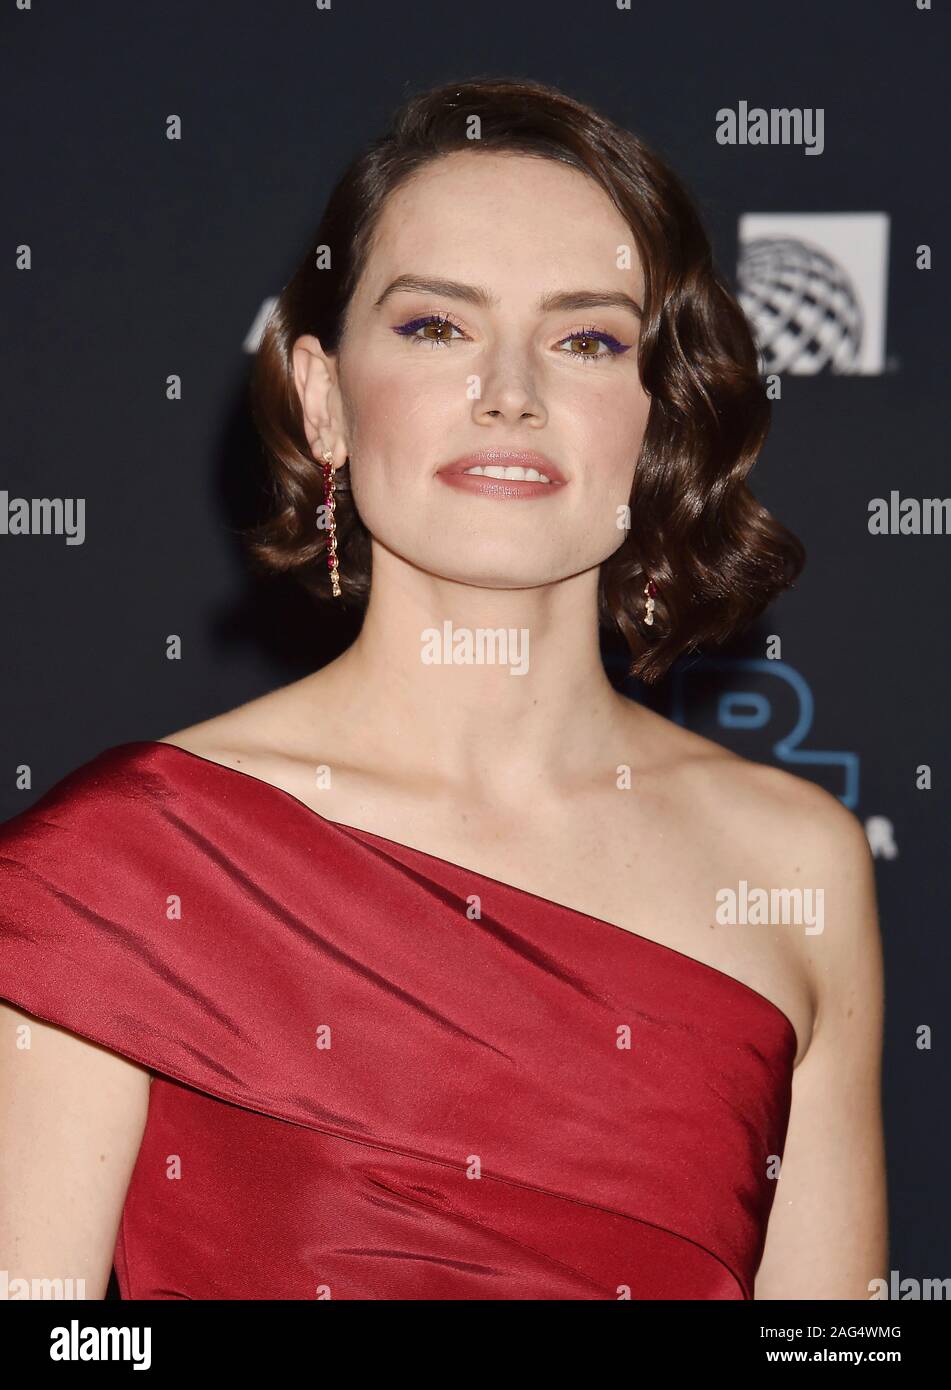 HOLLYWOOD, CA - DECEMBER 16: Daisy Ridley attends the Premiere of Disney's 'Star Wars: The Rise Of Skywalker' at the El Capitan Theatre on December 16, 2019 in Hollywood, California. Stock Photo